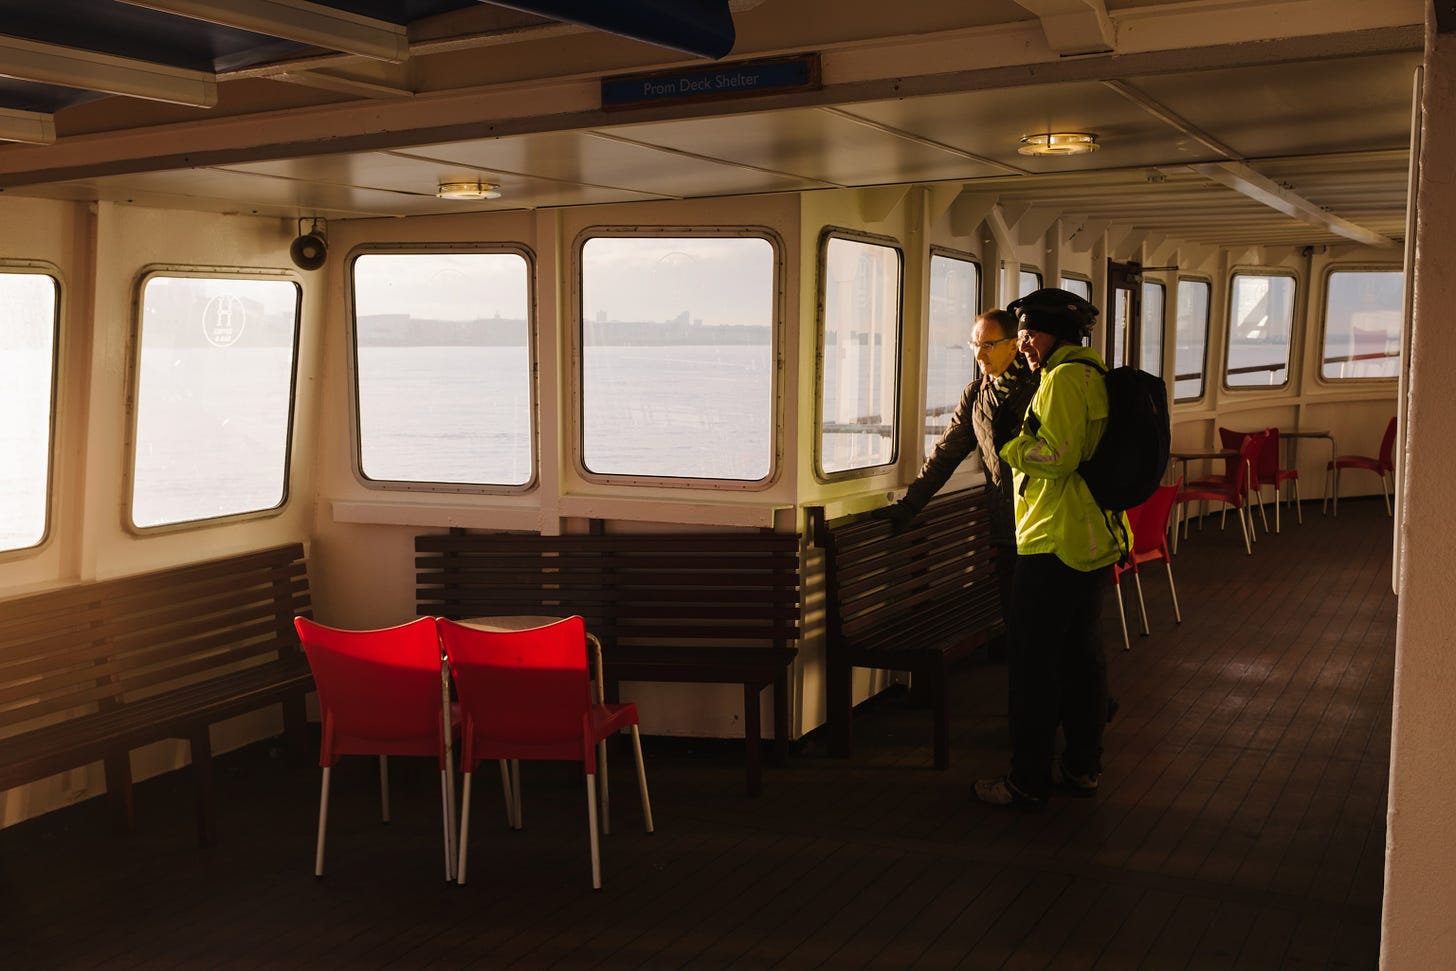 Two men stand talking inside the top deck of the ferry on an early morning ride to Liverpool. One man is wearing a hi-vis green jacket and there are red plastic chairs glowing in the early light.